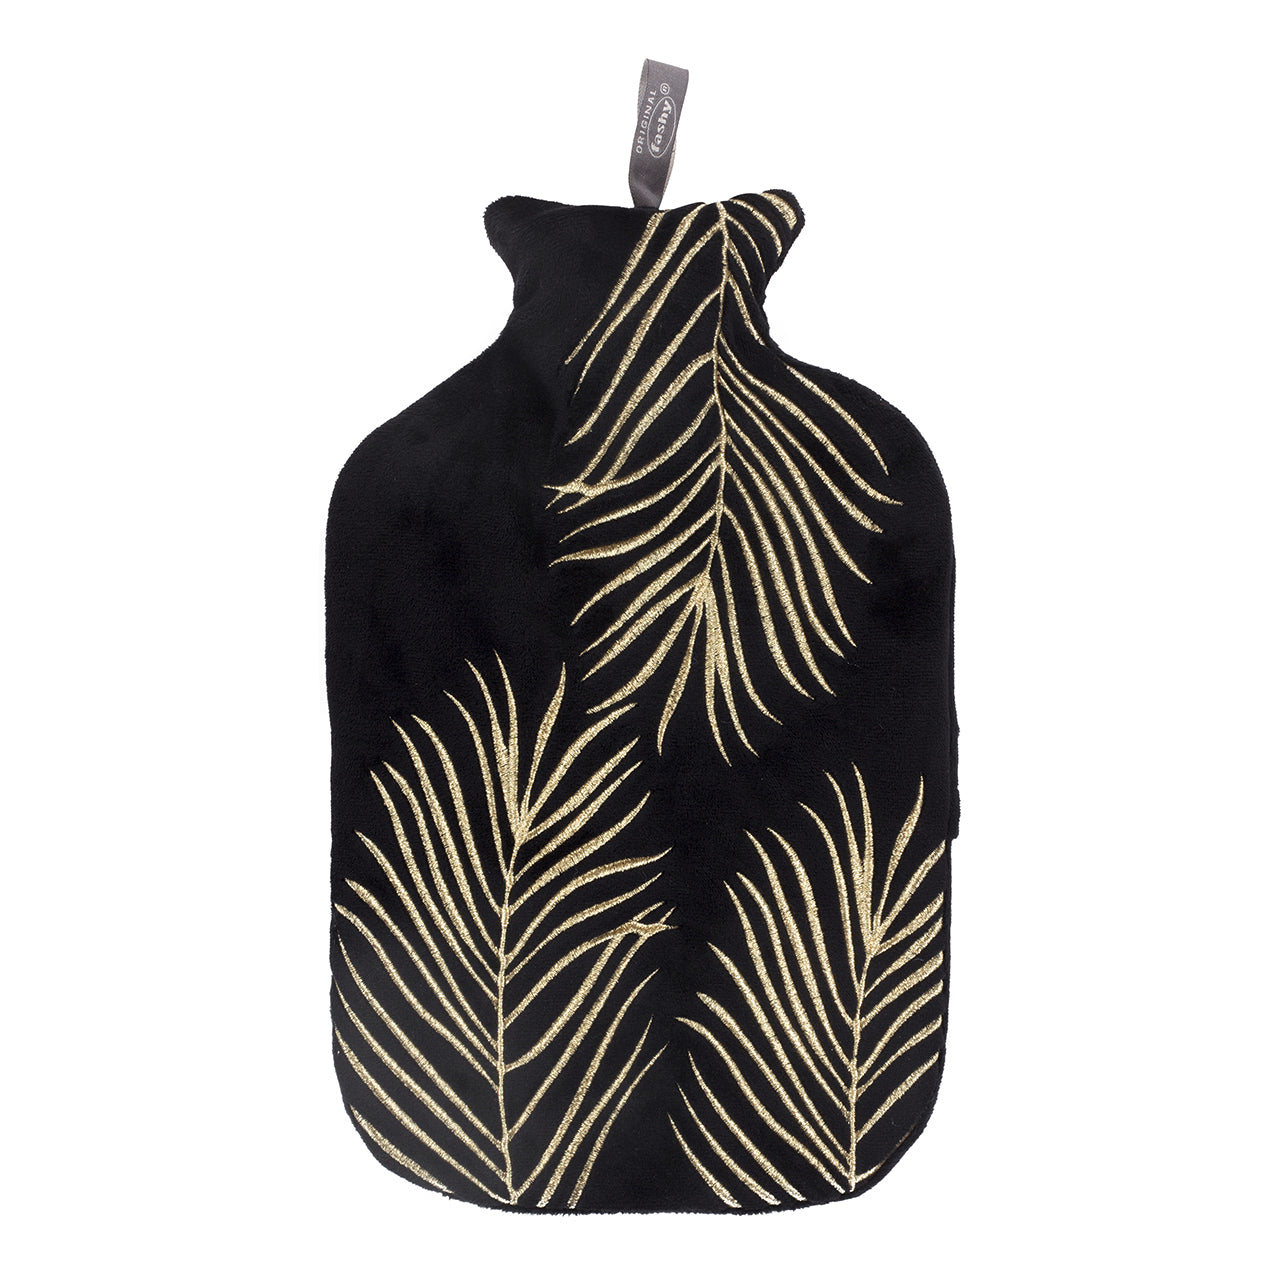 2 Litre Fashy Hot Water Bottle with Black and Gold Fern Fleece Cover